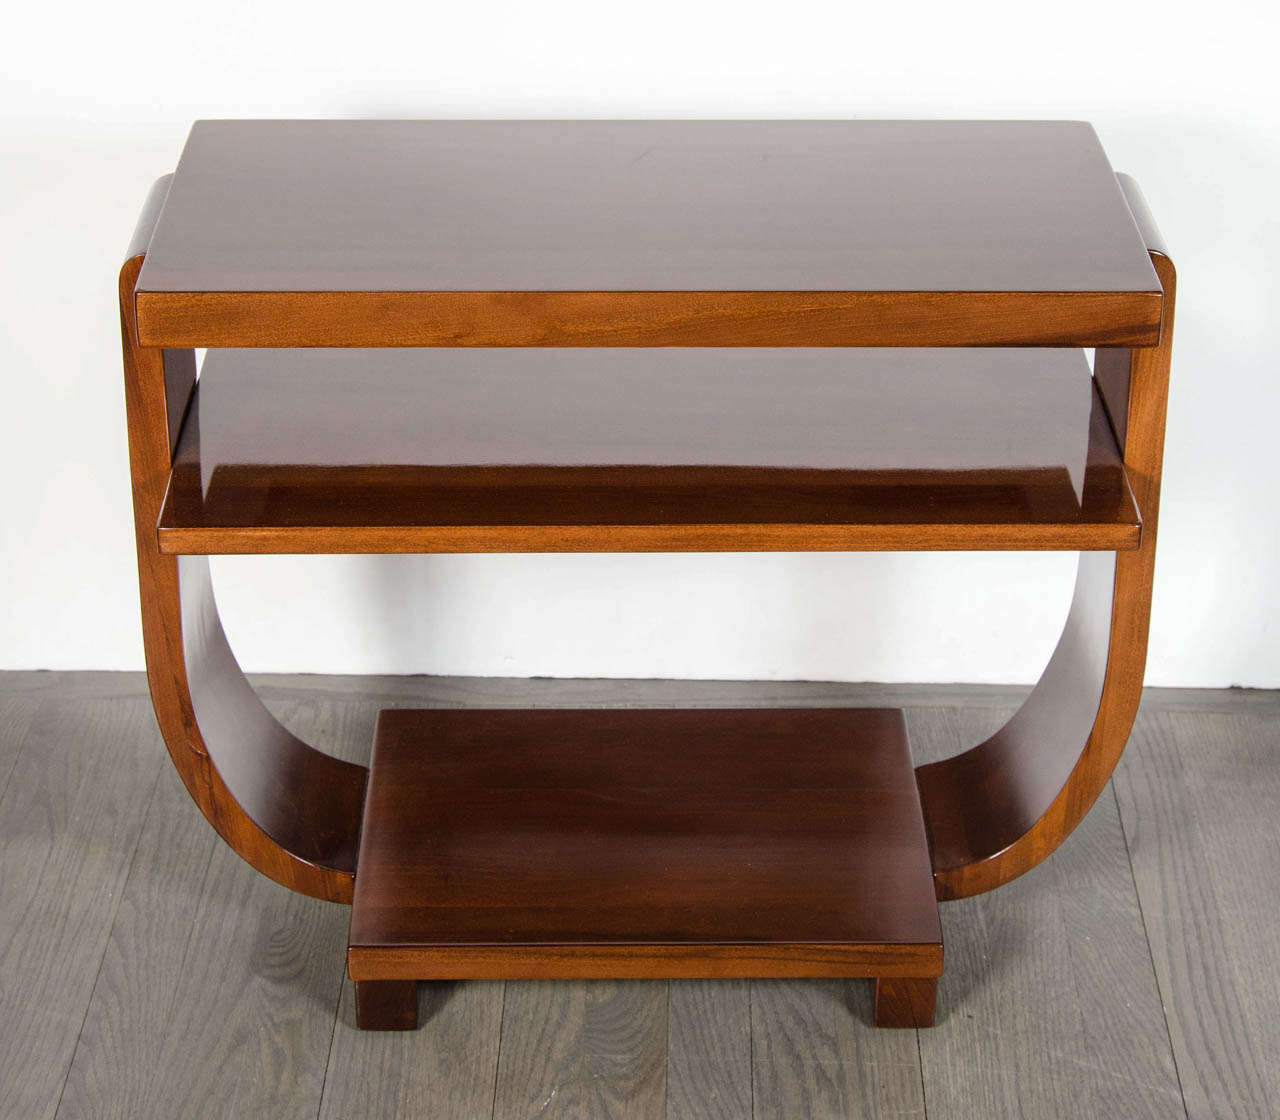 Art Deco book-matched Walnut side table with two-tiers, concave bentwood supports and a lower shelf.  This beautiful table is a great example of the streamline Art Deco movement in America.  It has been completely restored to mint condition.